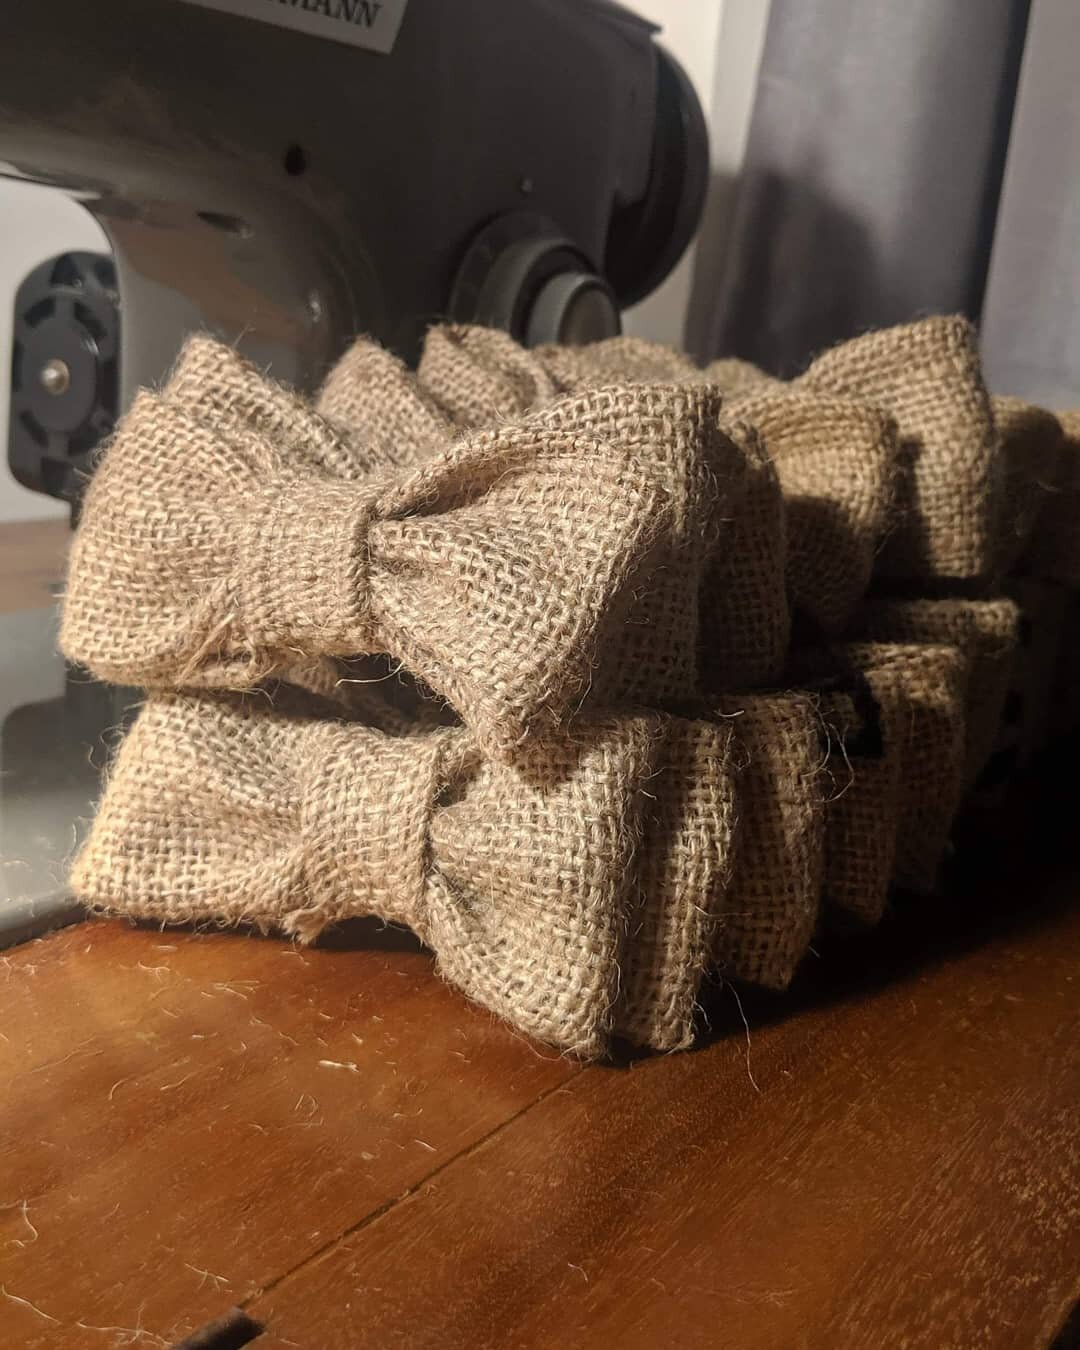 My very first order of bow ties!
Bow ties made out of #recycled #hessian #coffeesacks
Thank you so much @sidolx for trusting me with this!
.
.
#bowtie #bowties #wedding #magnet #fashion #sustainable #recycled #fabric #coffee #bag #sack #sacks #design